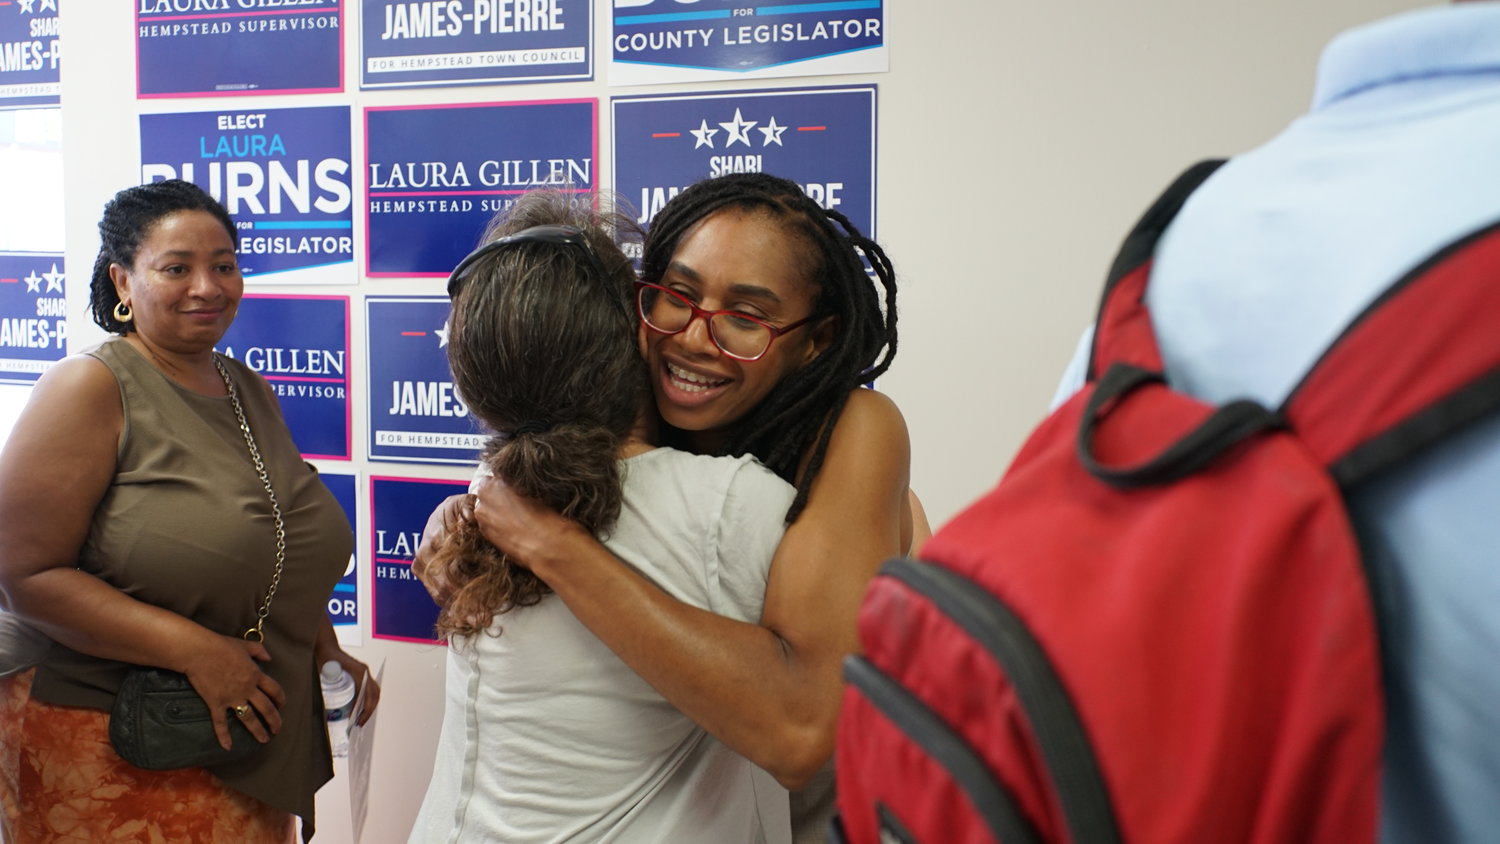 Valley Streamer Shari James hugged a supporter at her campaign kickoff on Saturday. She will be running in November for the Town of Hempstead 3rd Council District against Bruce Blakeman.